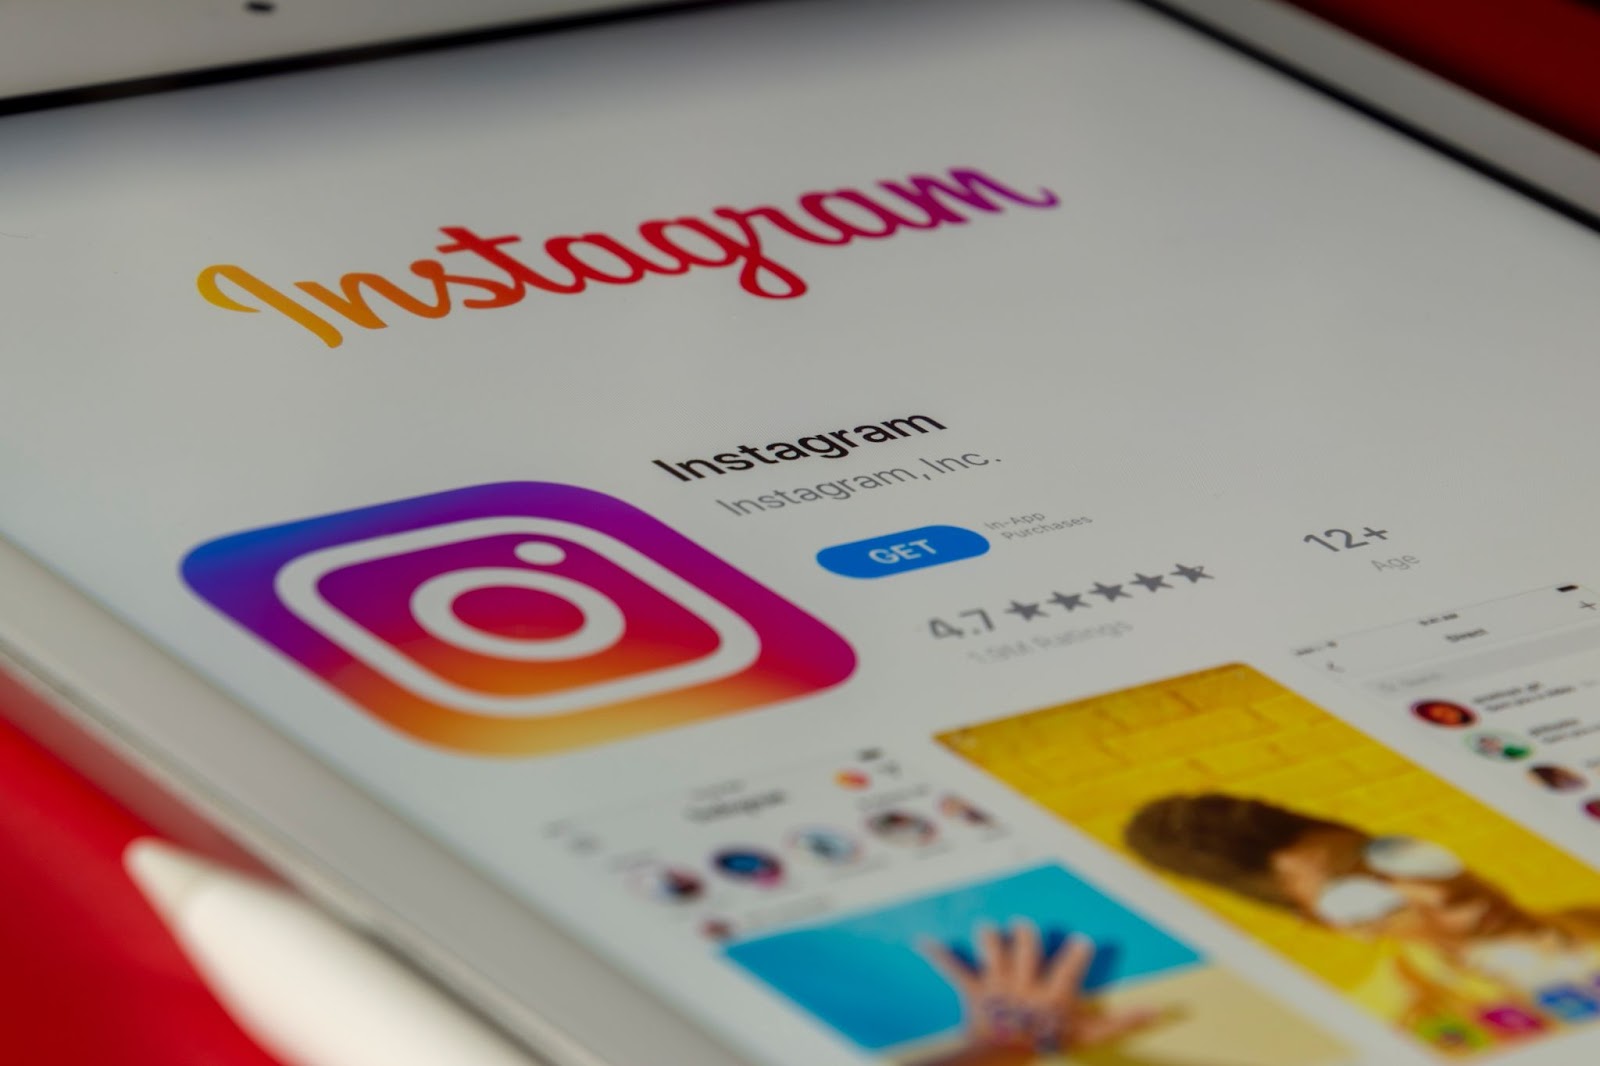 How To Block Hashtags On Instagram: A Step-By-Step Guide